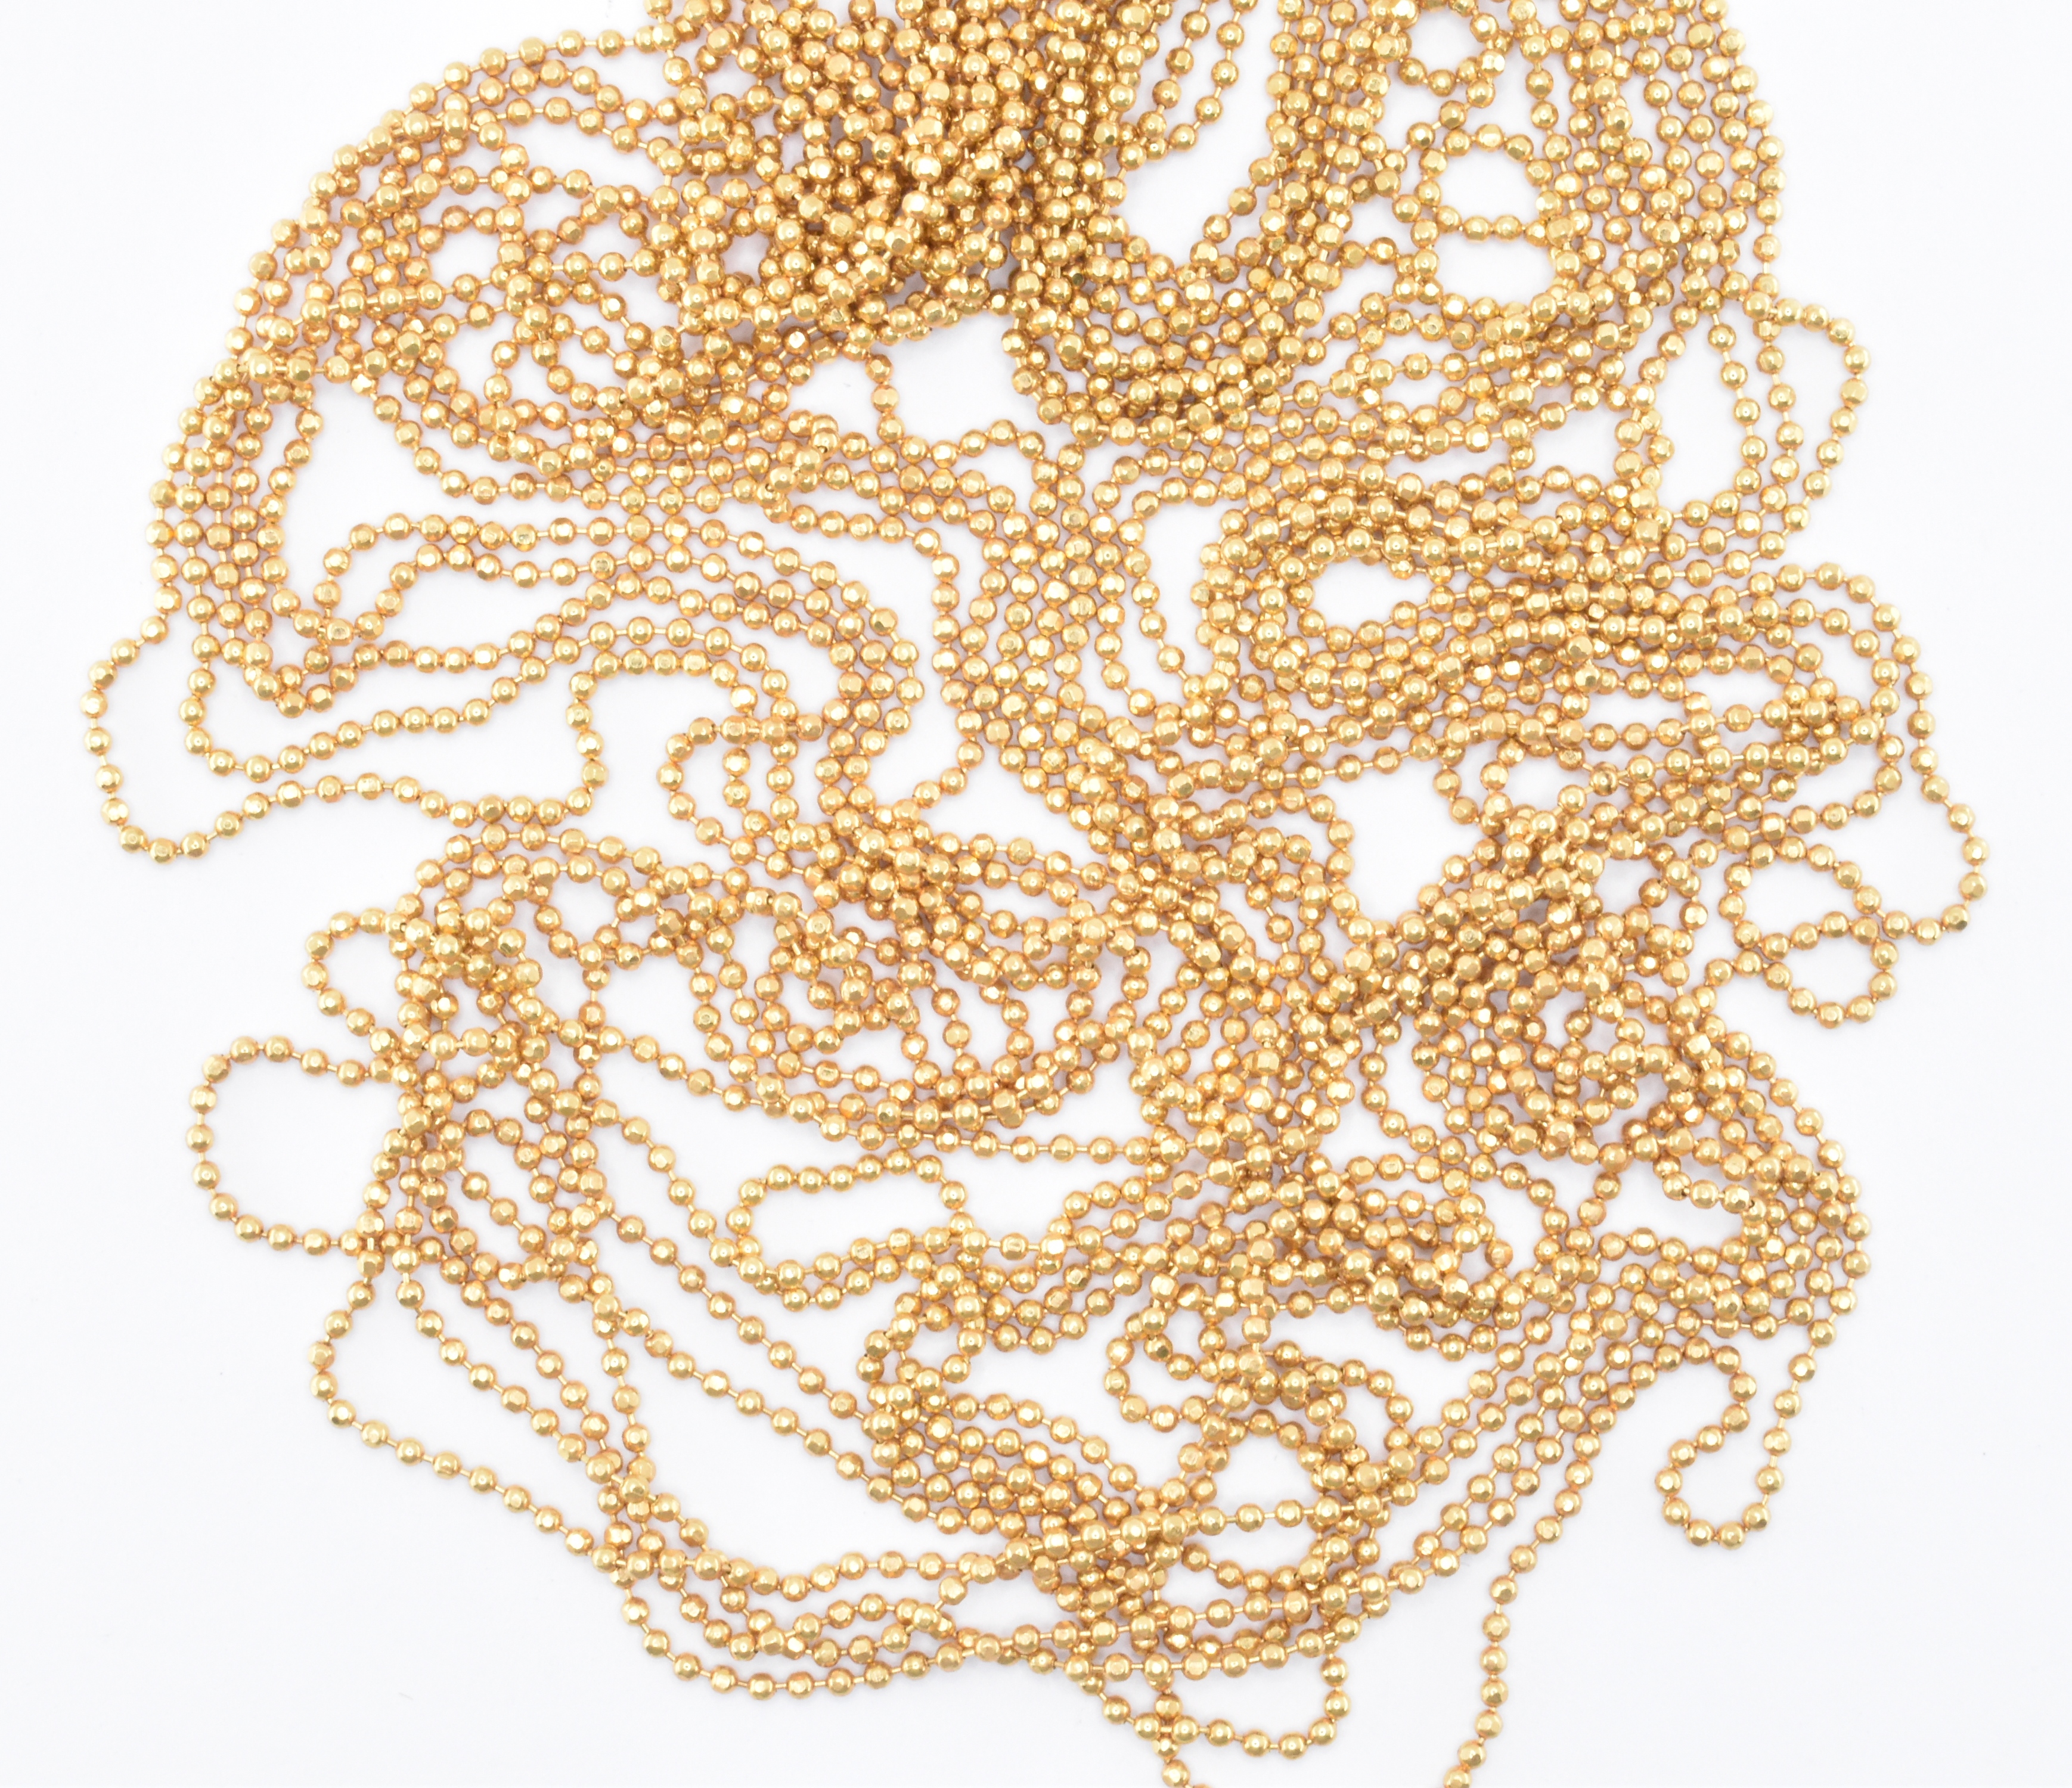 14K CONTINENTAL GOLD EIGHT STRING NECKLACE - Image 5 of 6